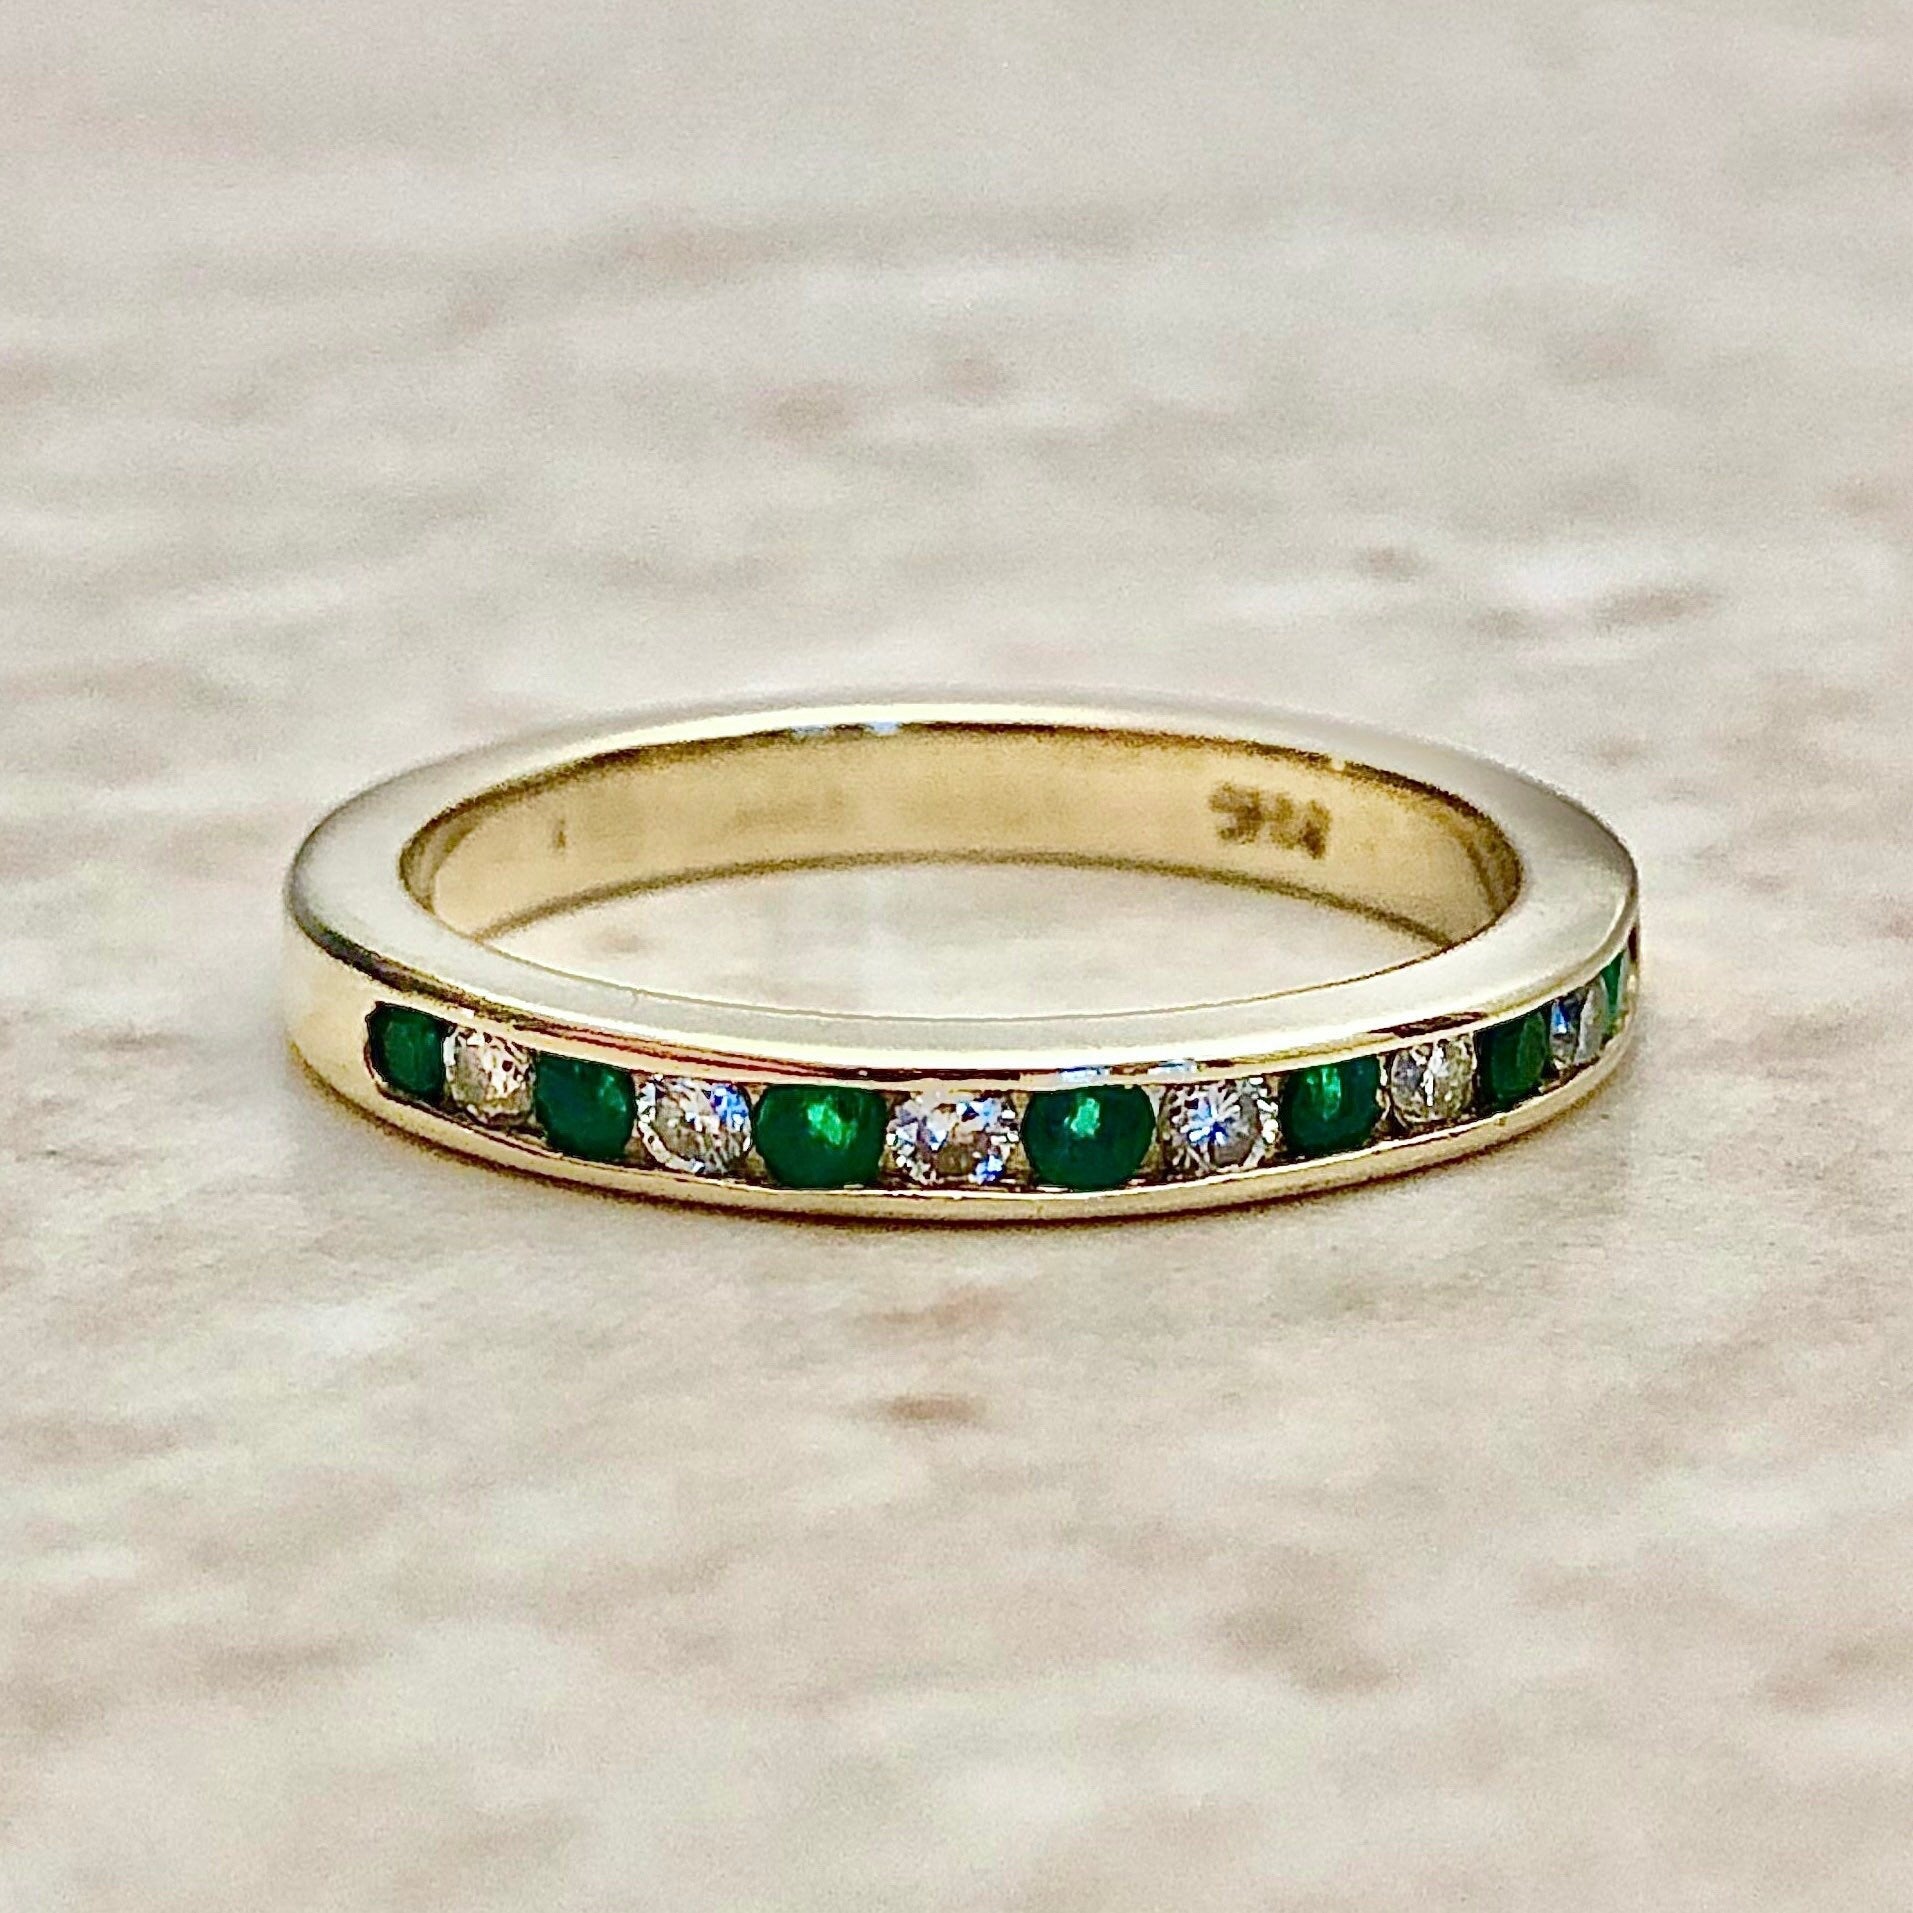 Fine Natural Emerald & Diamond Ring - 14K Yellow Gold - Genuine Gemstone - Anniversary Ring - Promise Ring - April May Birthstone - Size 6